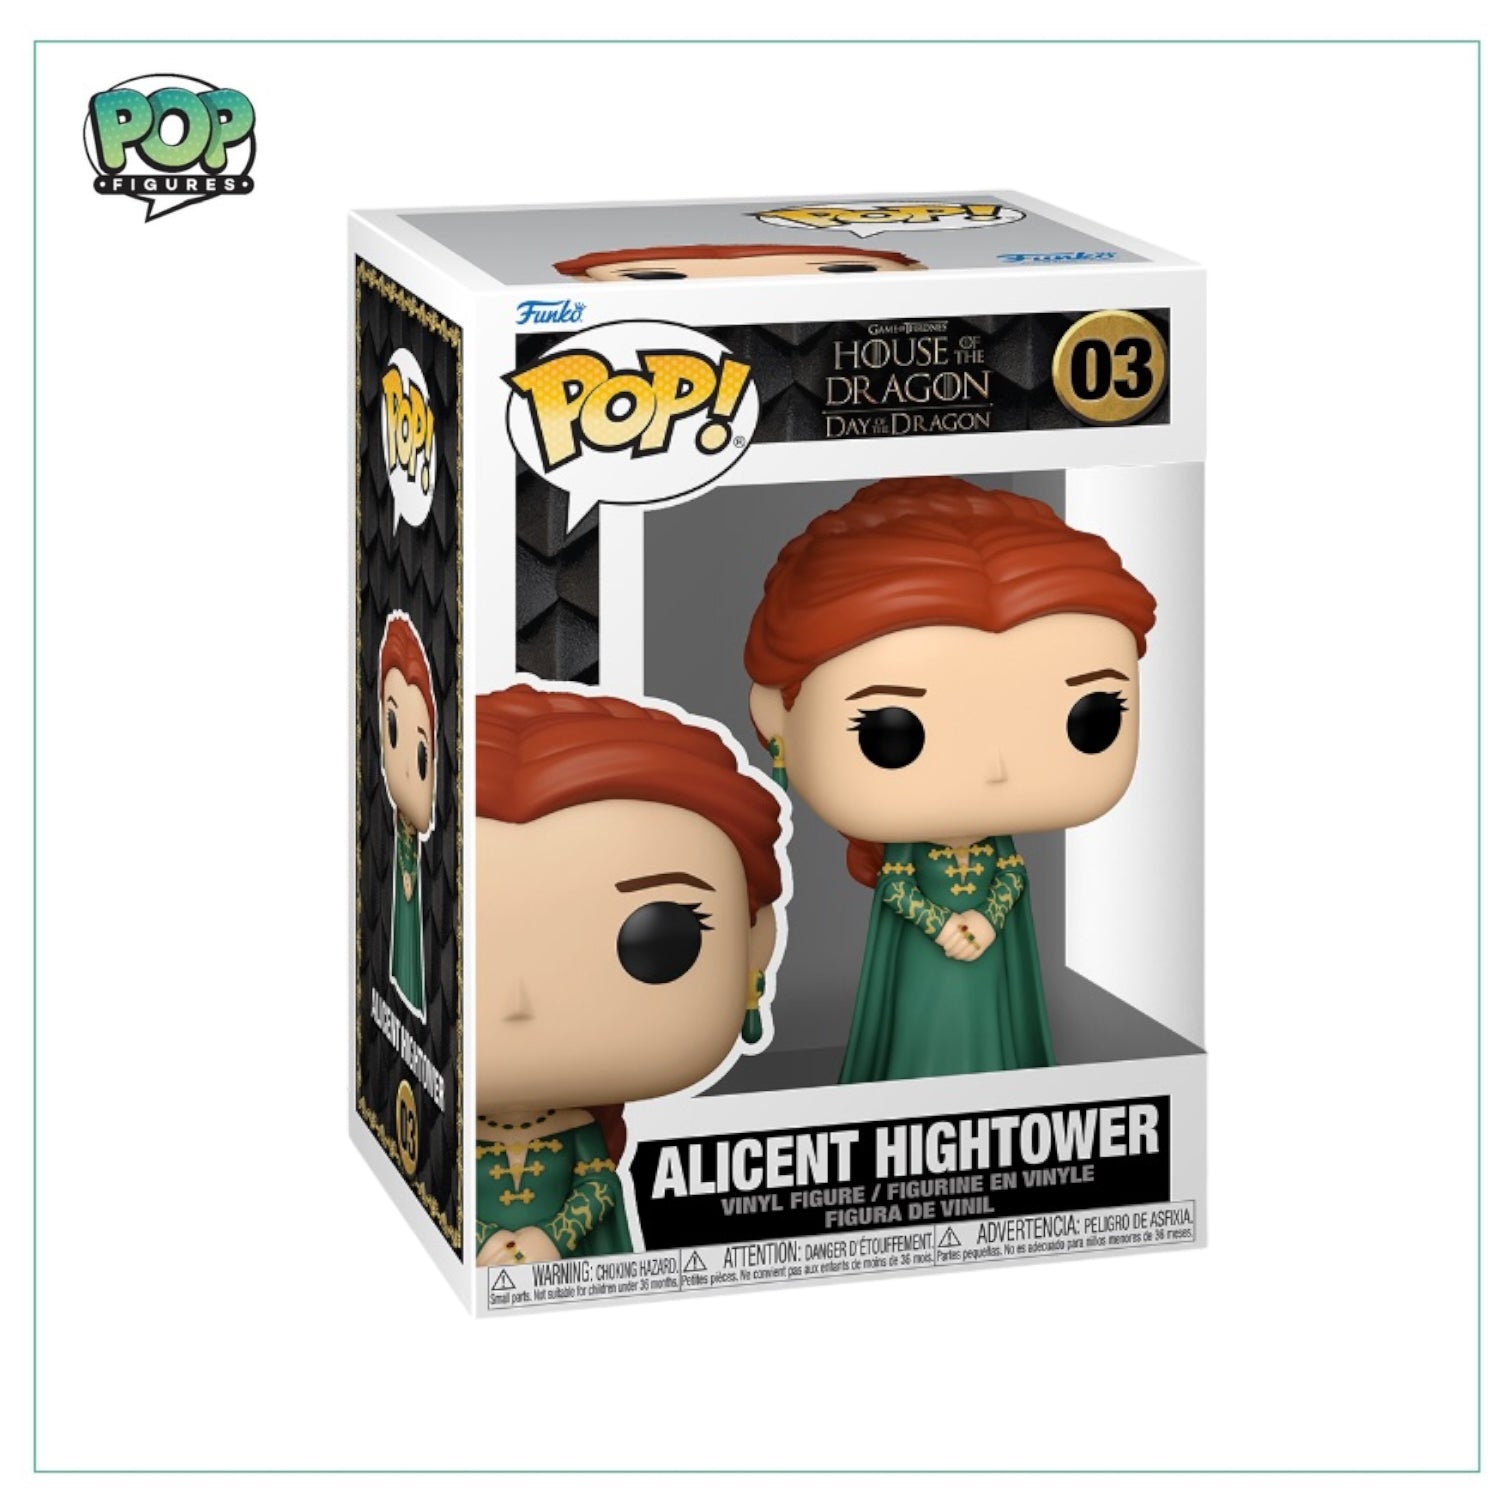 Alicent Hightower #03 Funko Pop! - House of the Dragon